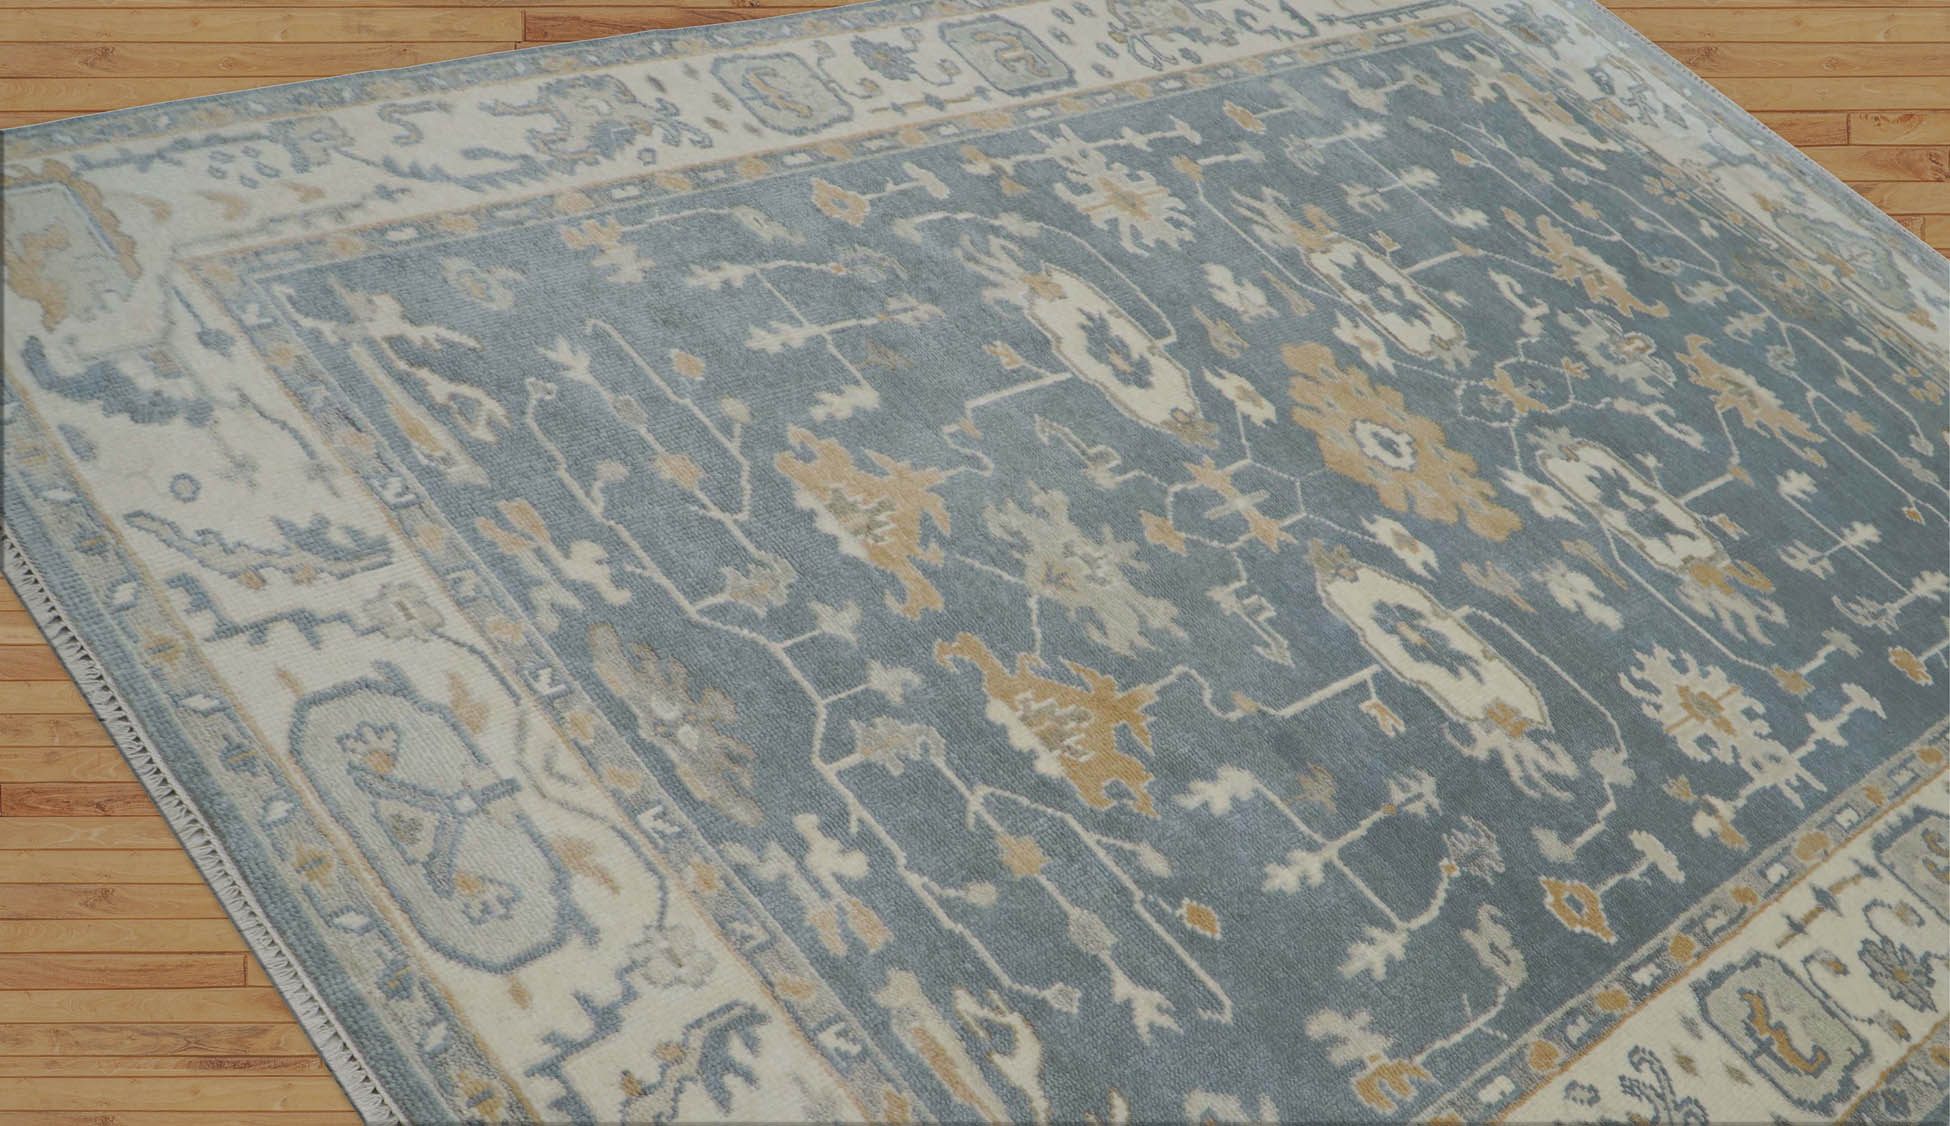 Lucas-Oliver 9x12 Hand Knotted LoomBloom Muted Turkish Oushak  100% Wool Transitional Oriental Area Rug Grayish Blue, Ivory Color